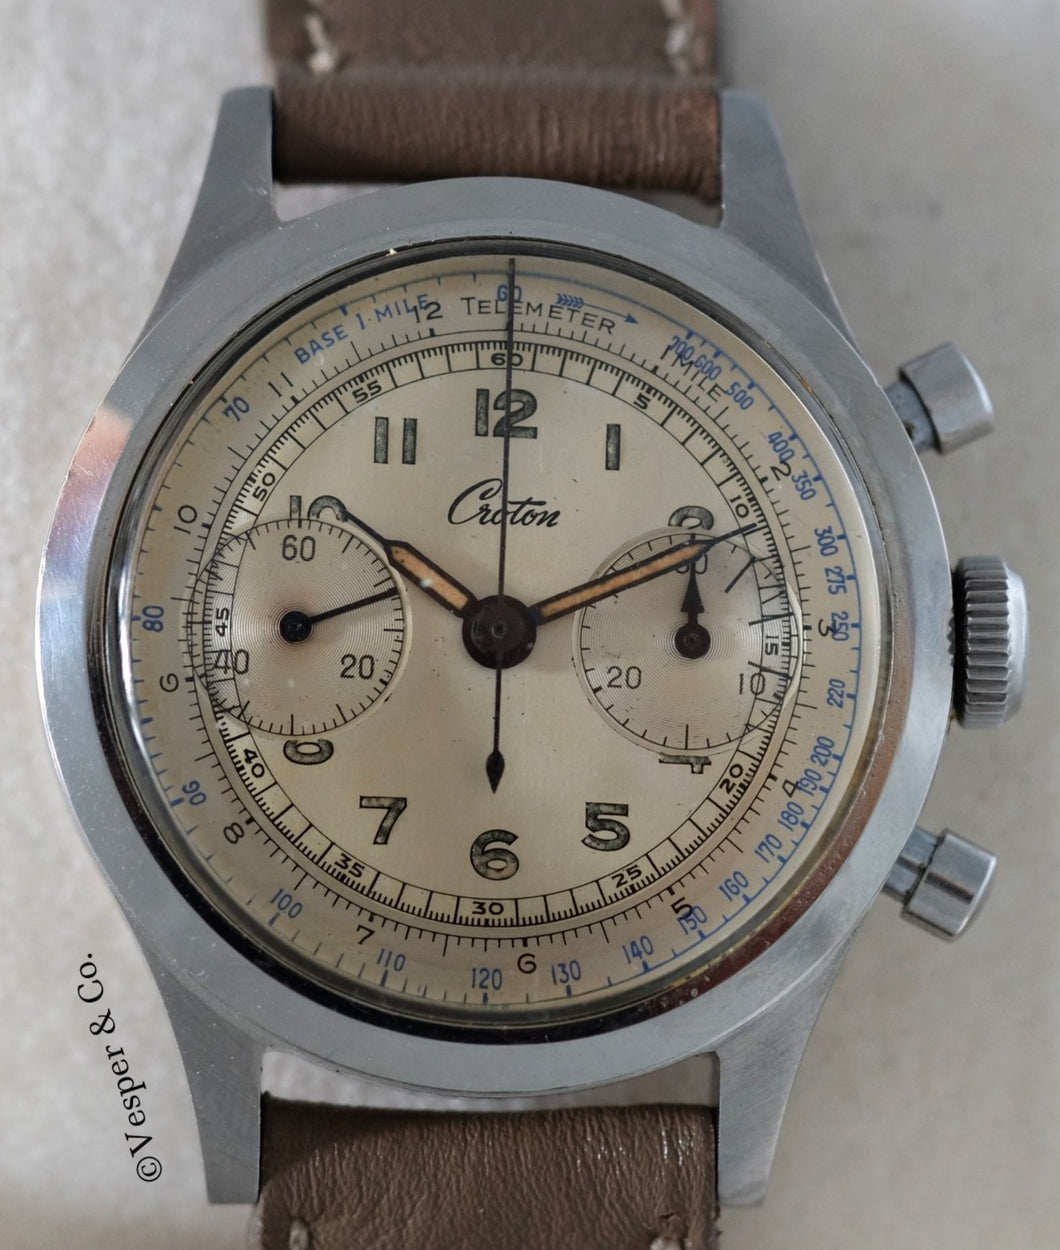 Croton Clamshell Chronograph with Tachometer and Telemeter Scales